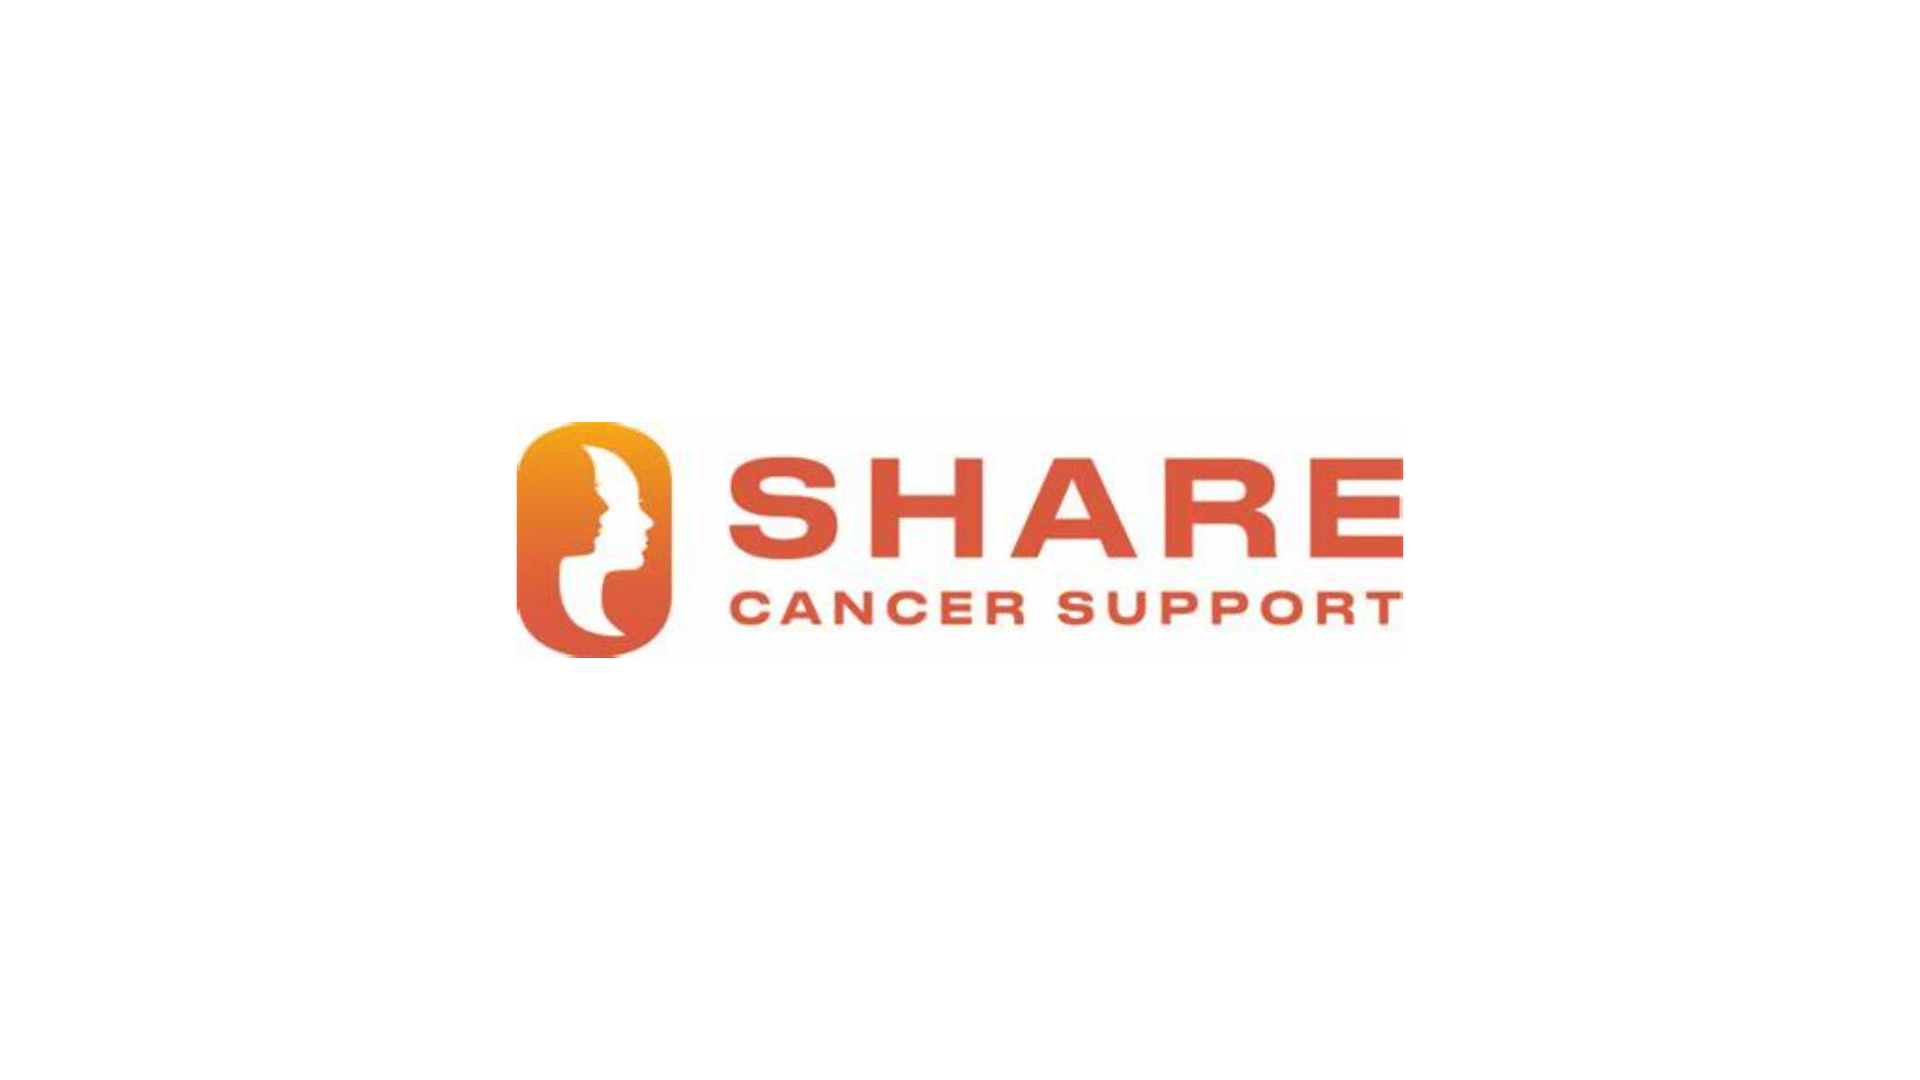 Banghee Chi Named as Incoming VP of Development at SHARE Cancer Support